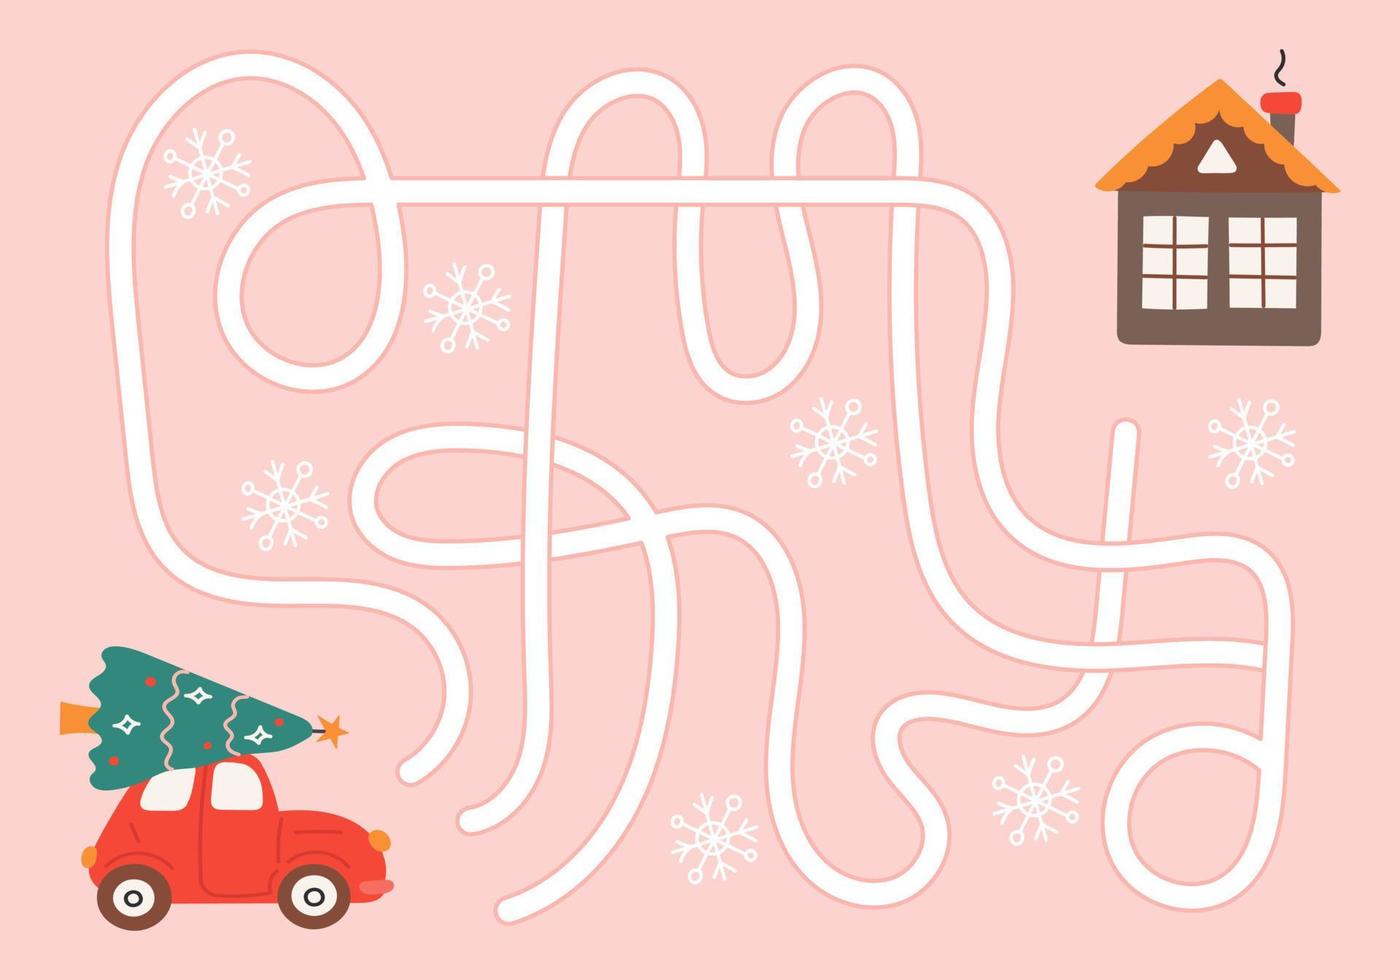 Labyrinth, help the car with the Christmas tree to find the right way to the house. Logical quest for children. Cute illustration for childrens books, educational game vector